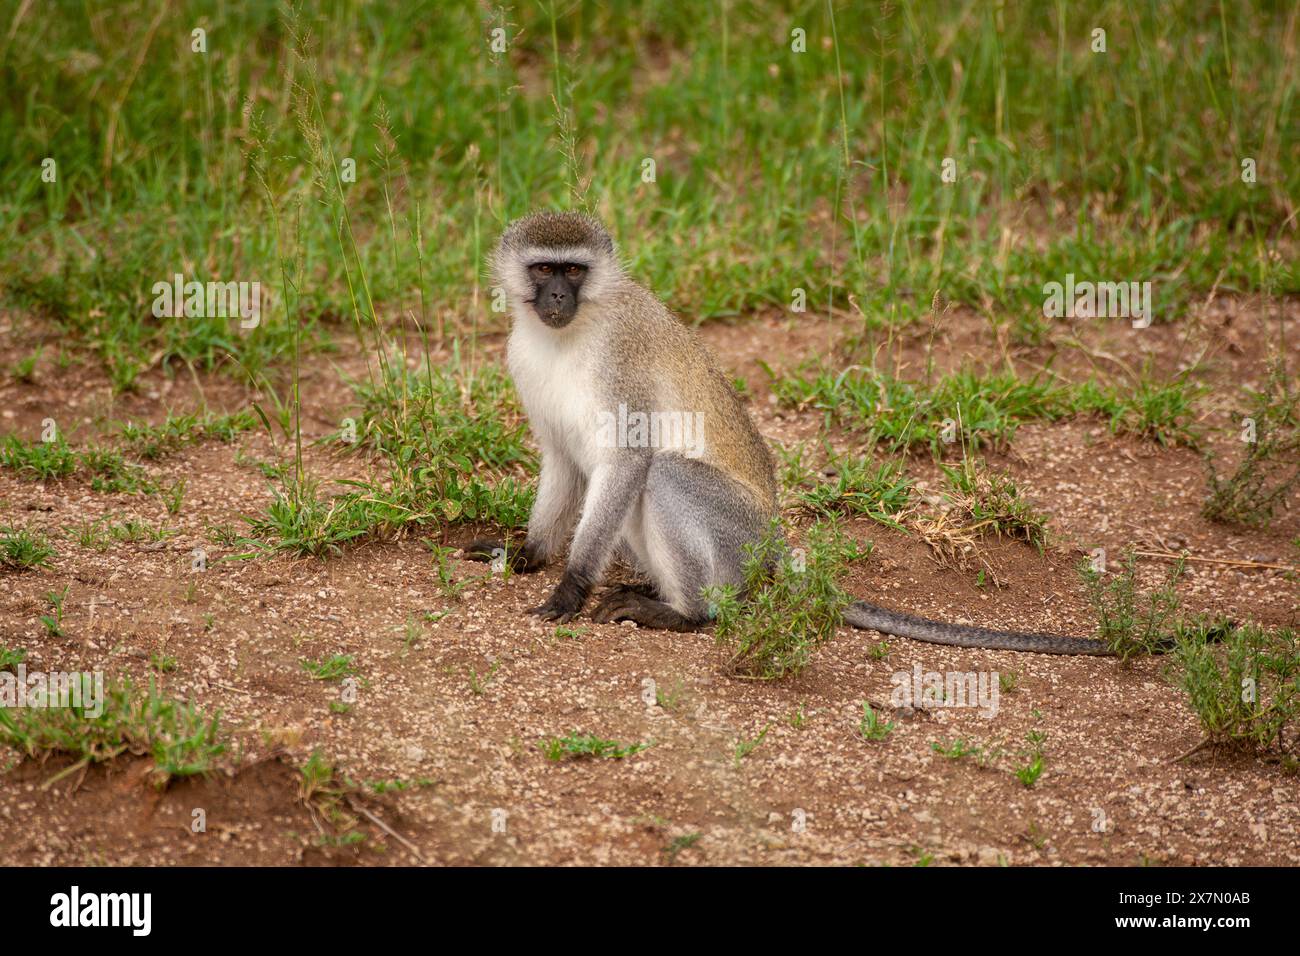 Vervet monkey (Chlorocebus pygerythrus). These monkeys are native to Africa. They are found mostly throughout Southern Africa, as well as some of the Stock Photo